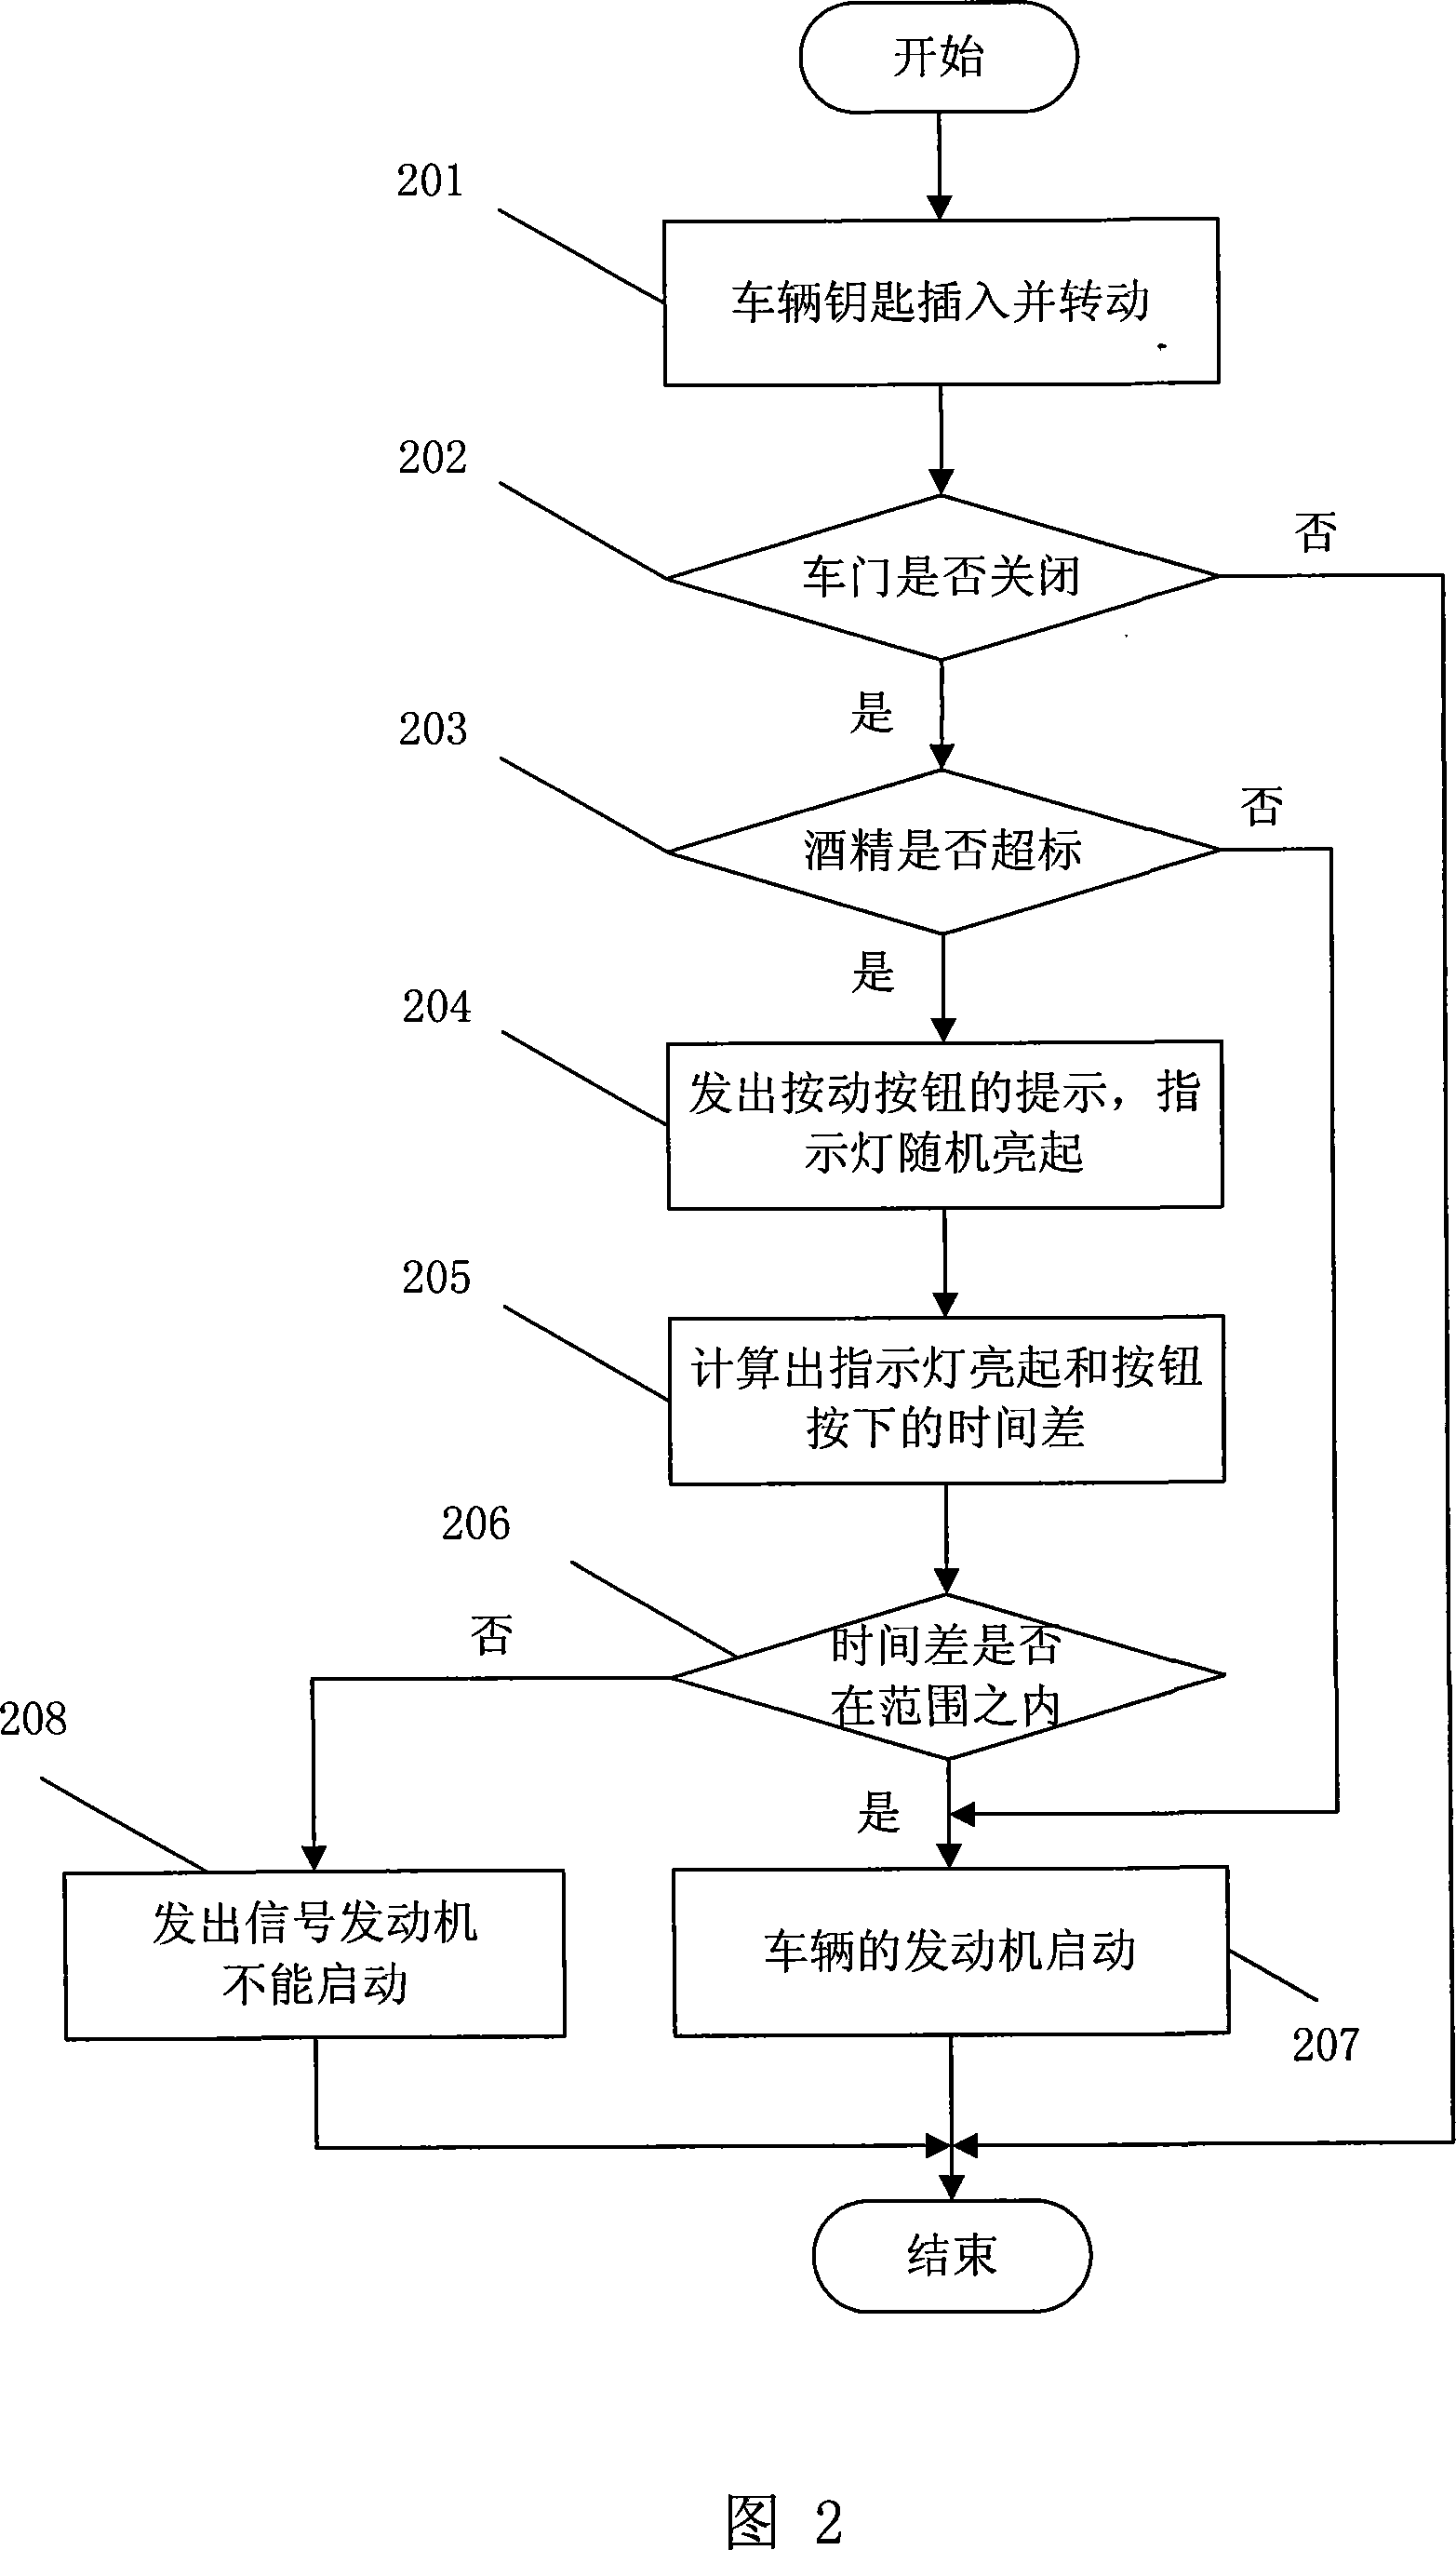 Method and system for detecting vehicle alcohol